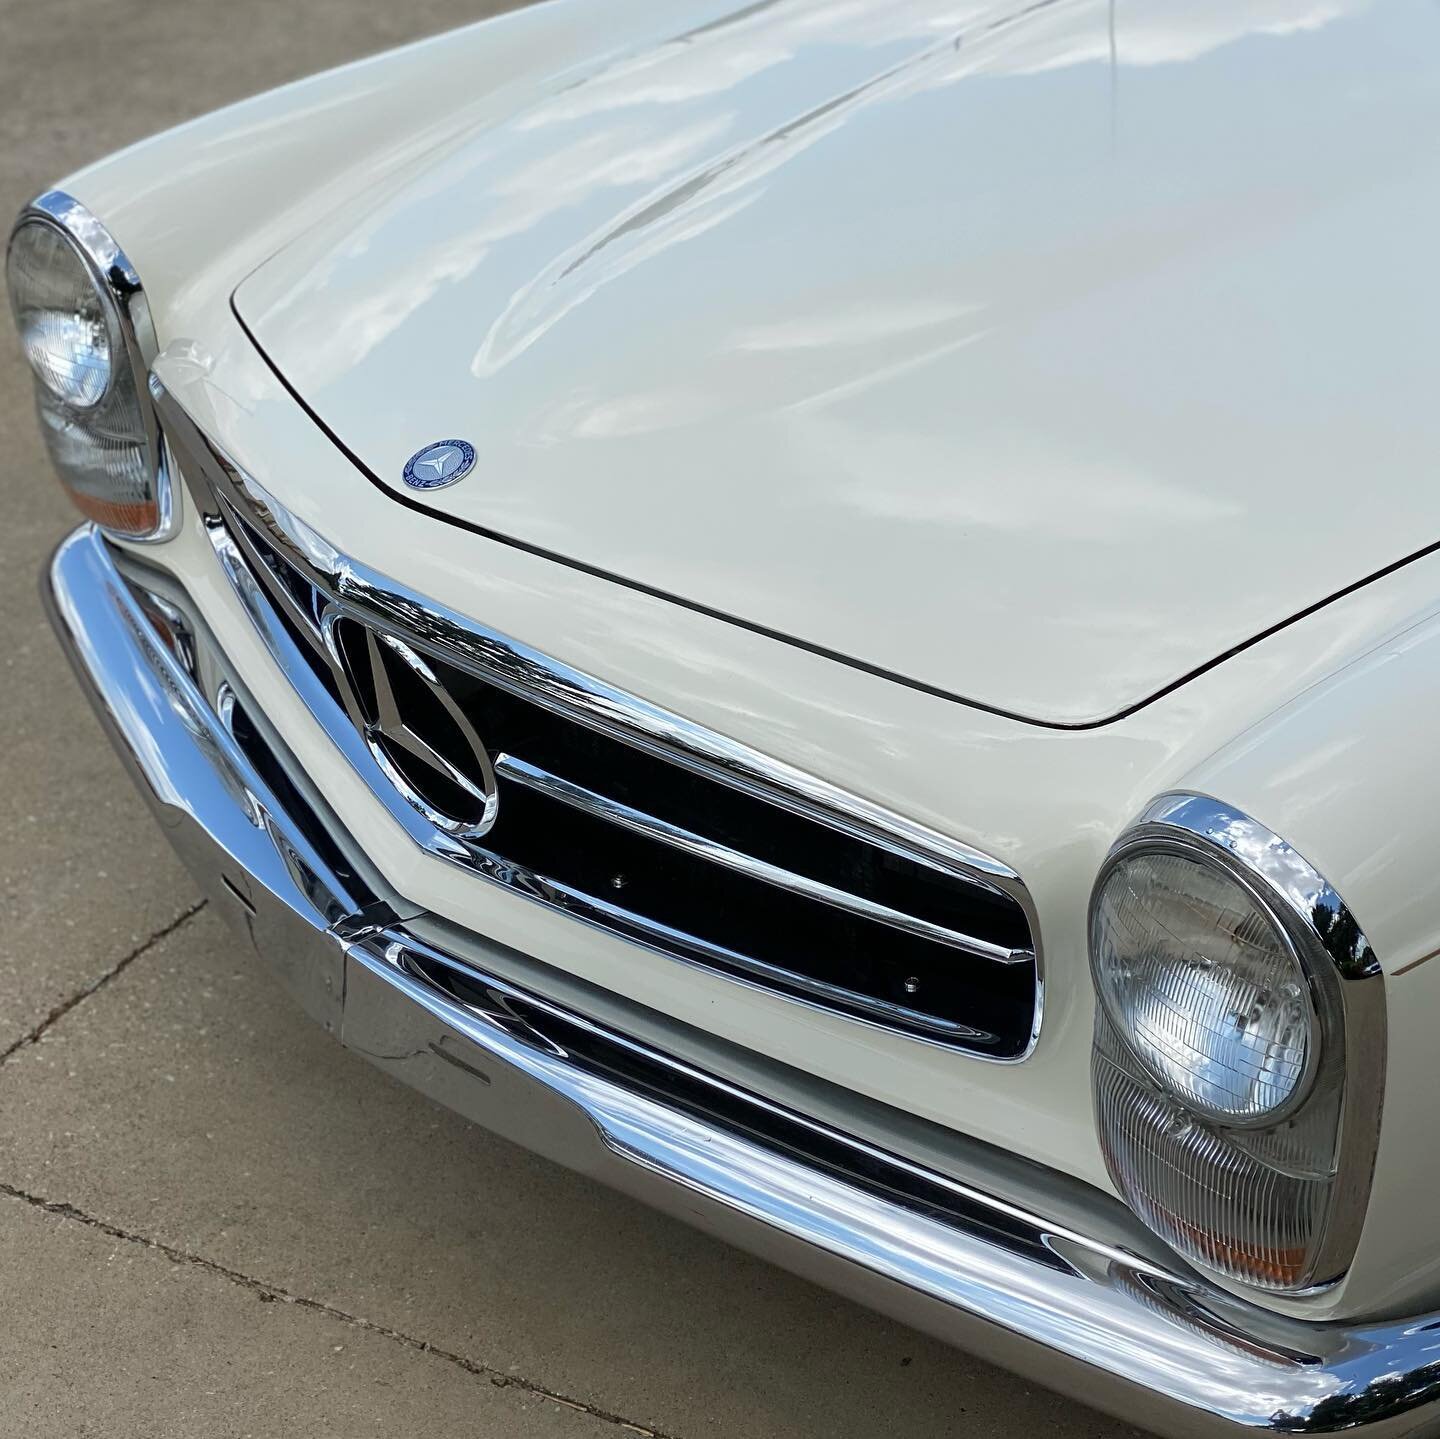 1966 Mercedes SL230 all polished up for resale. Yes this gem is for sale. Call to schedule your resale today. 

#sl230
#mercedesbenz 
#drivephilthy
#shinesupply